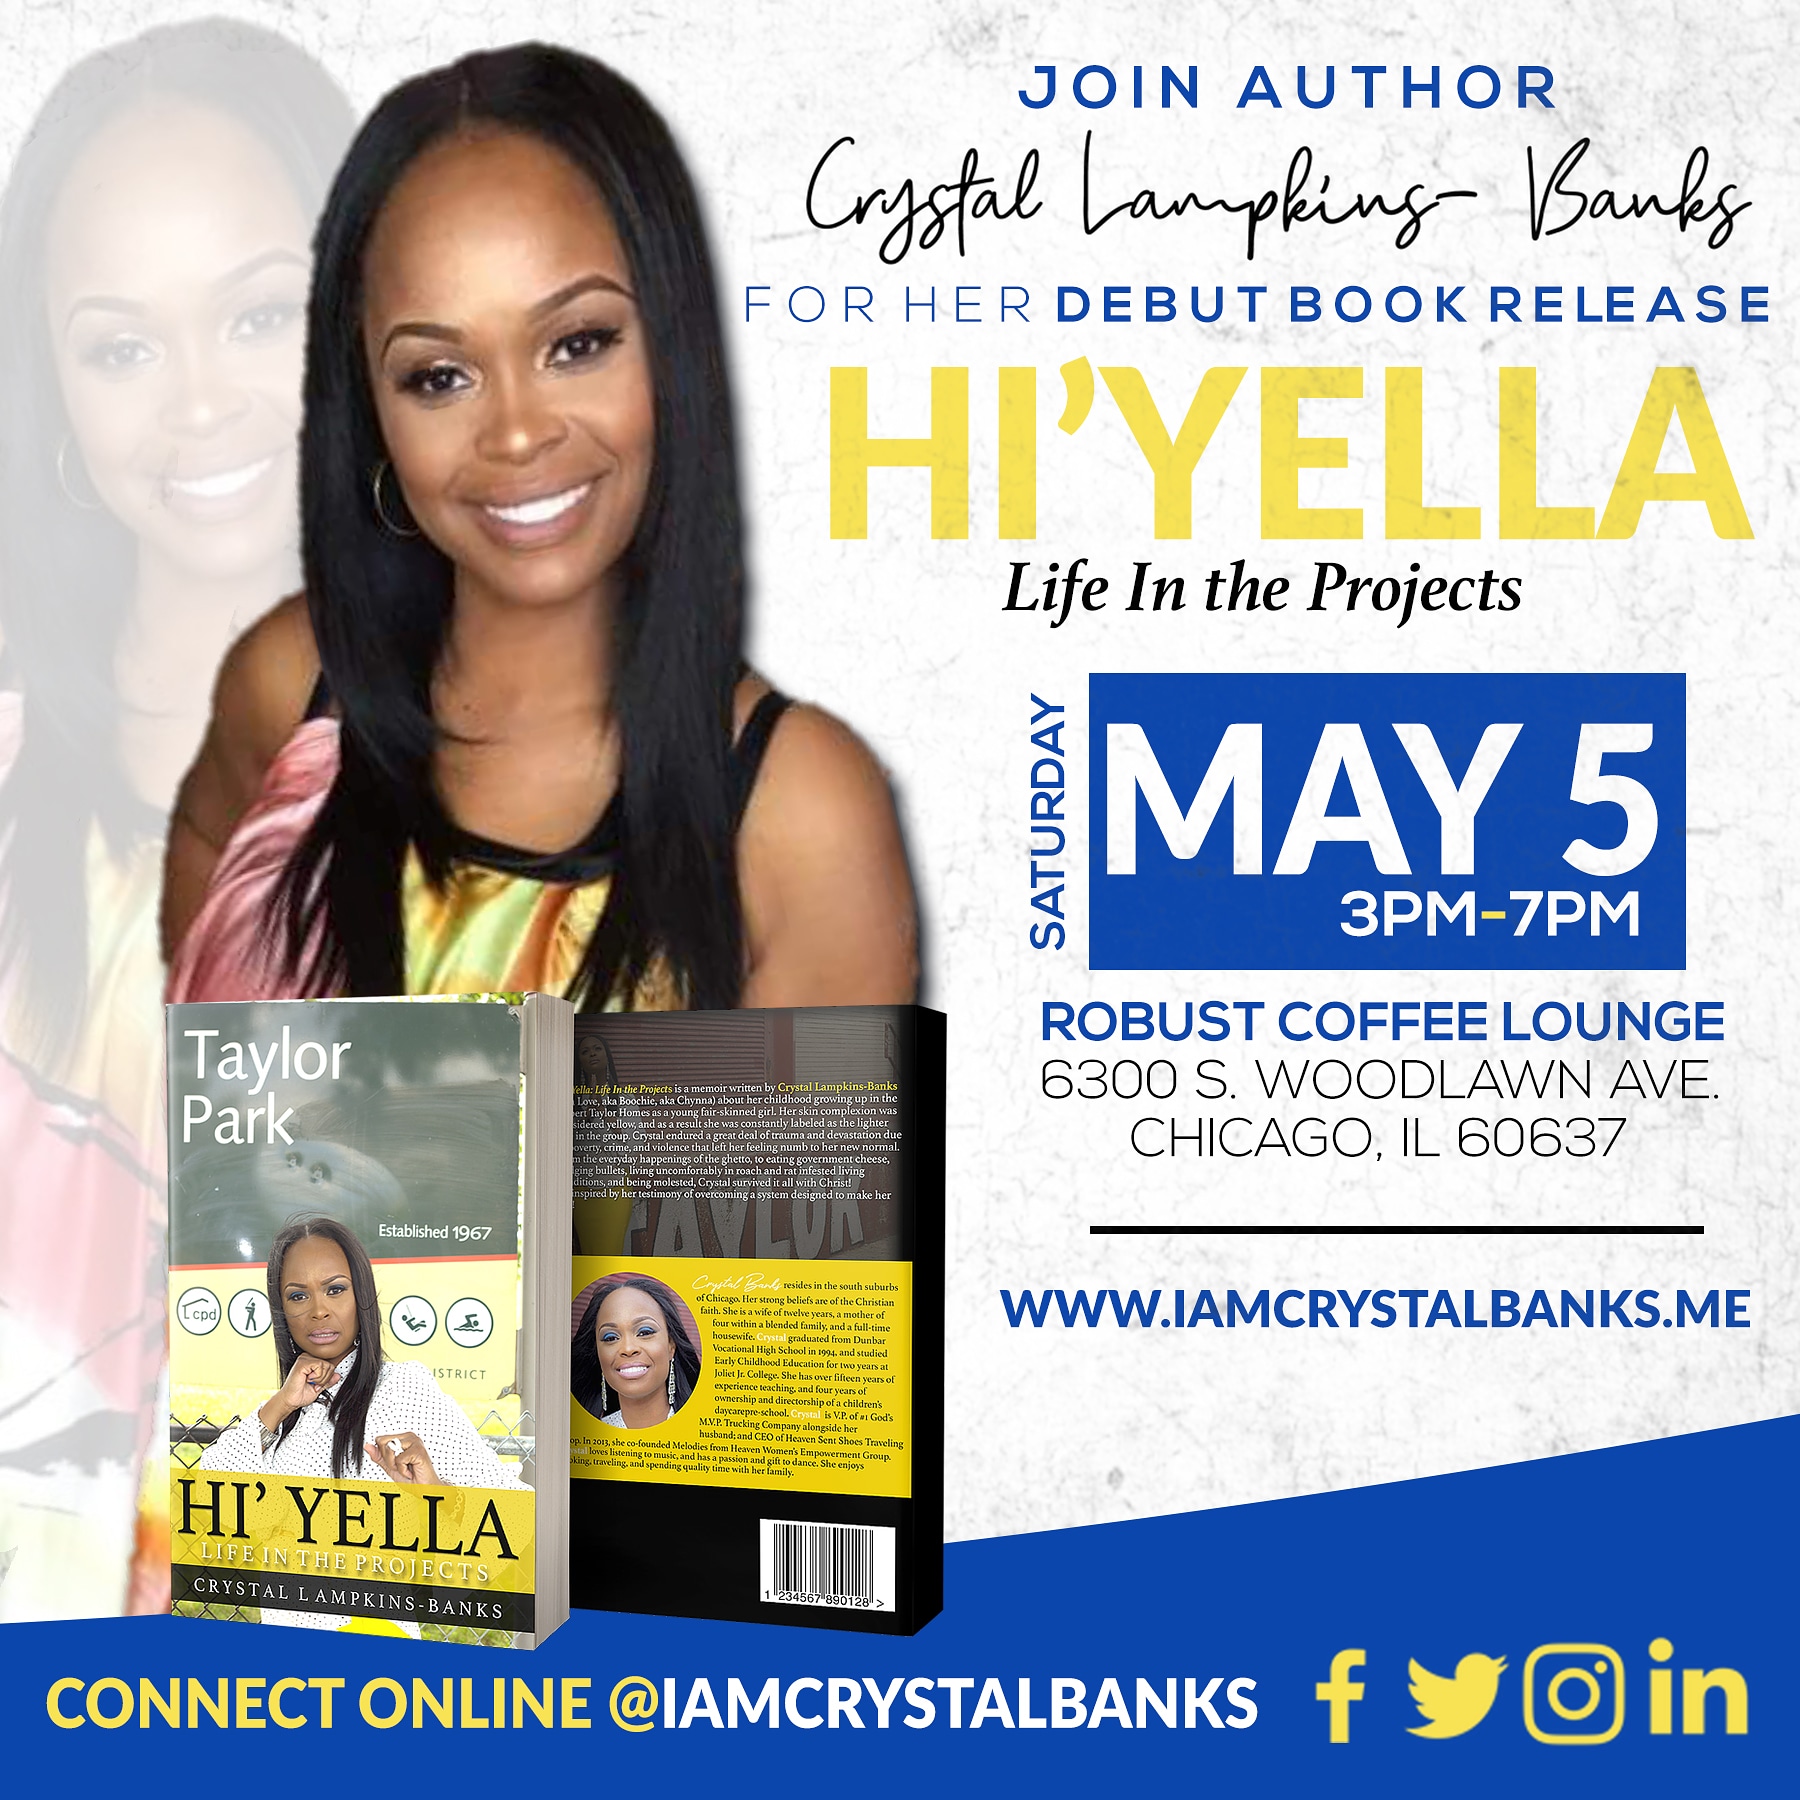 Hi' Yella - Life In The Projects Book Debut (2 Locations)